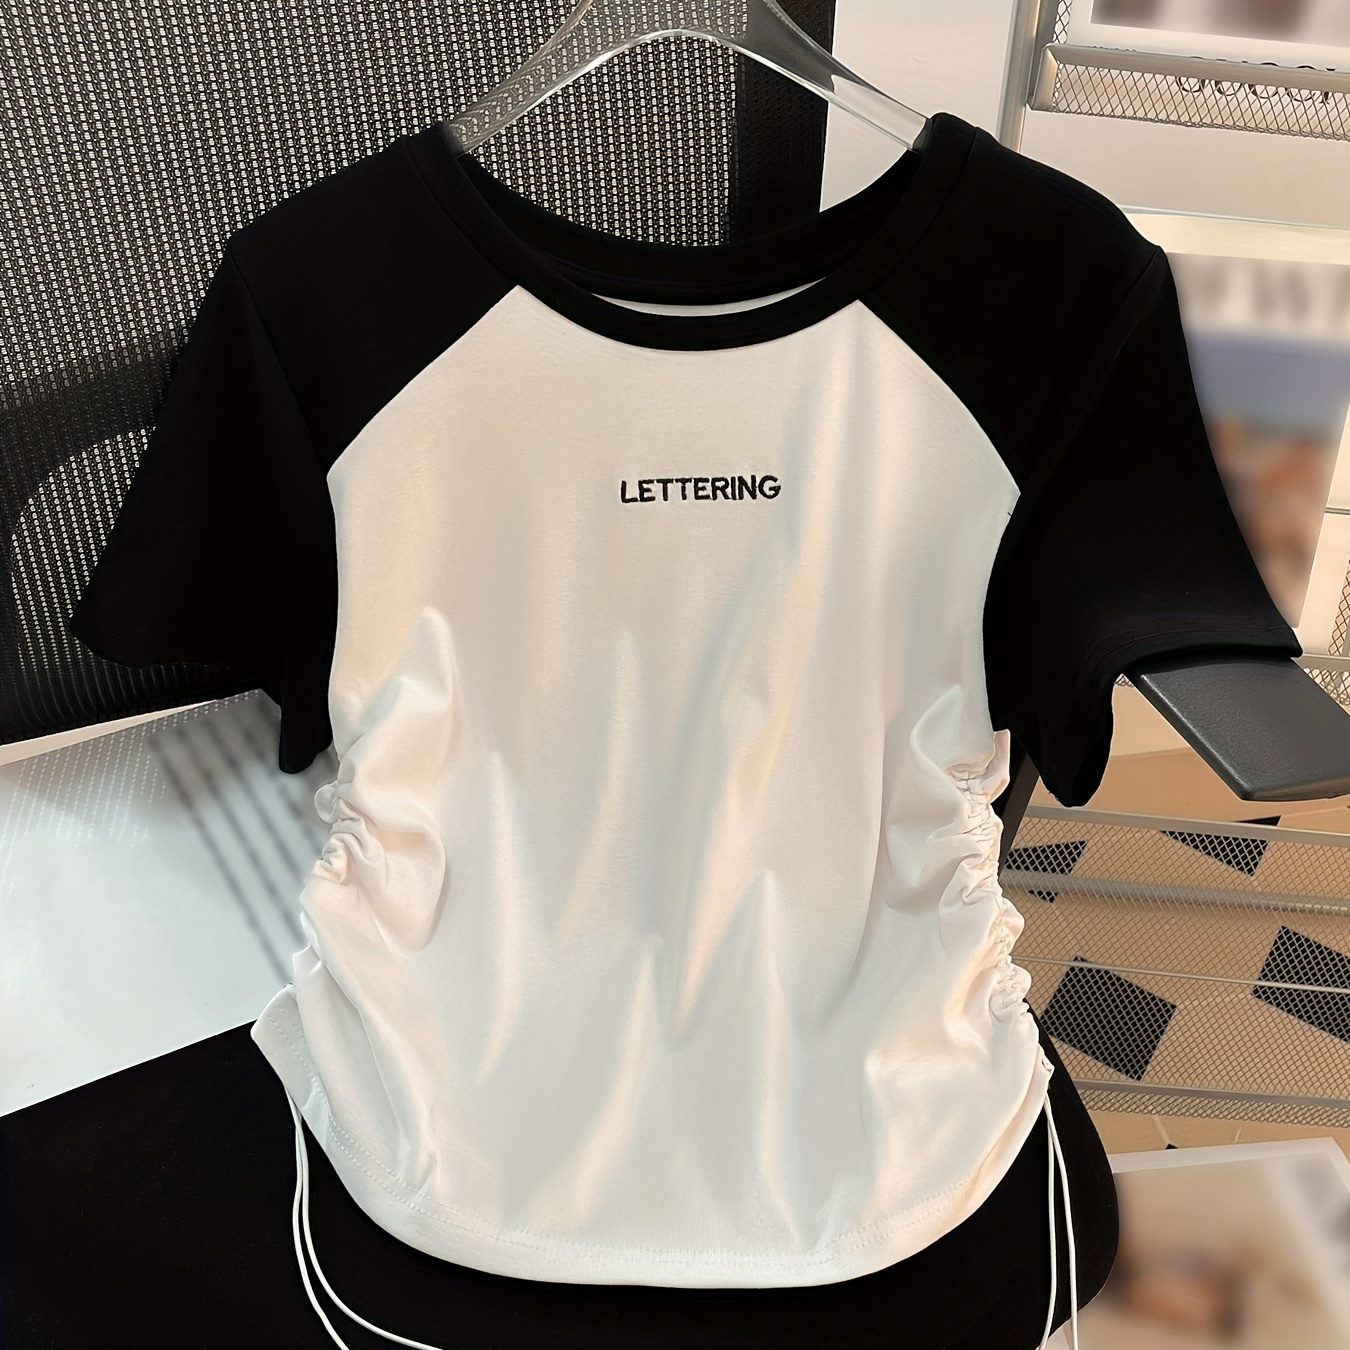 

Letter Print Crew Neck T-shirt, Casual Color Block Drawstring Raglan Sleeve Top For Spring & Summer, Women's Clothing